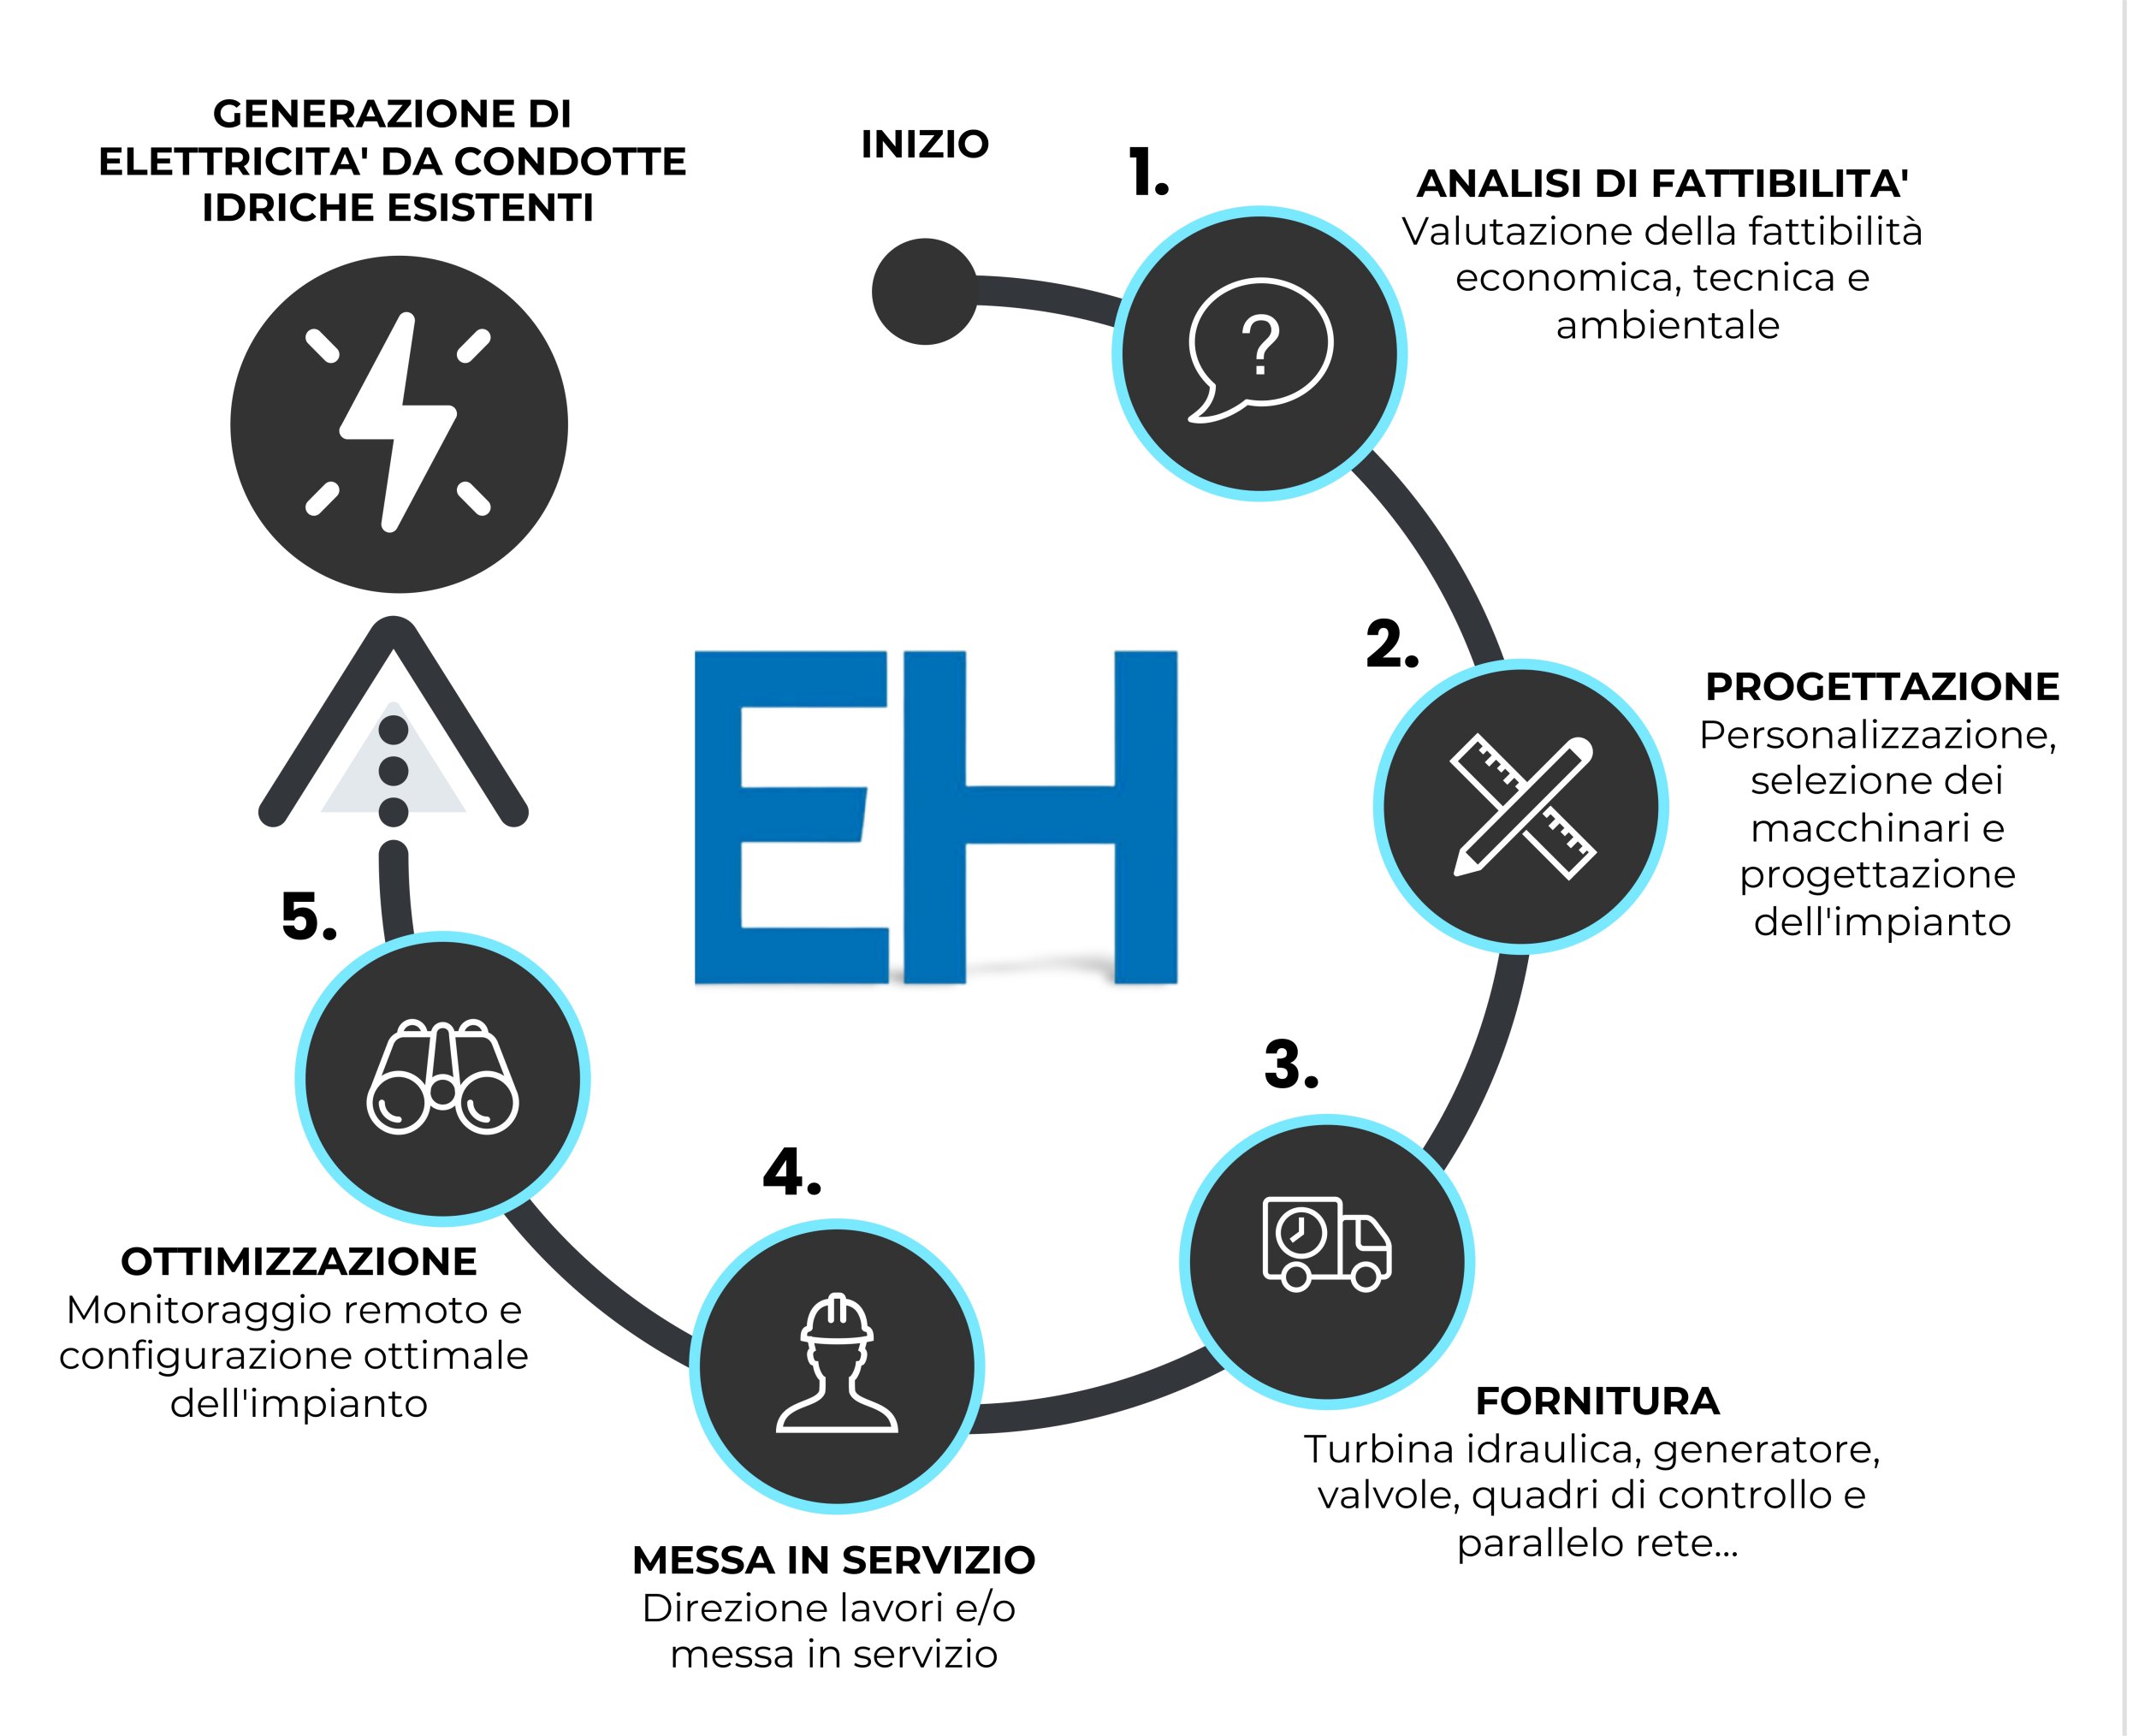 The five stages of the Easy Hydro process: feasibility study, engineering design, equipment supply, commissioning and optimization.